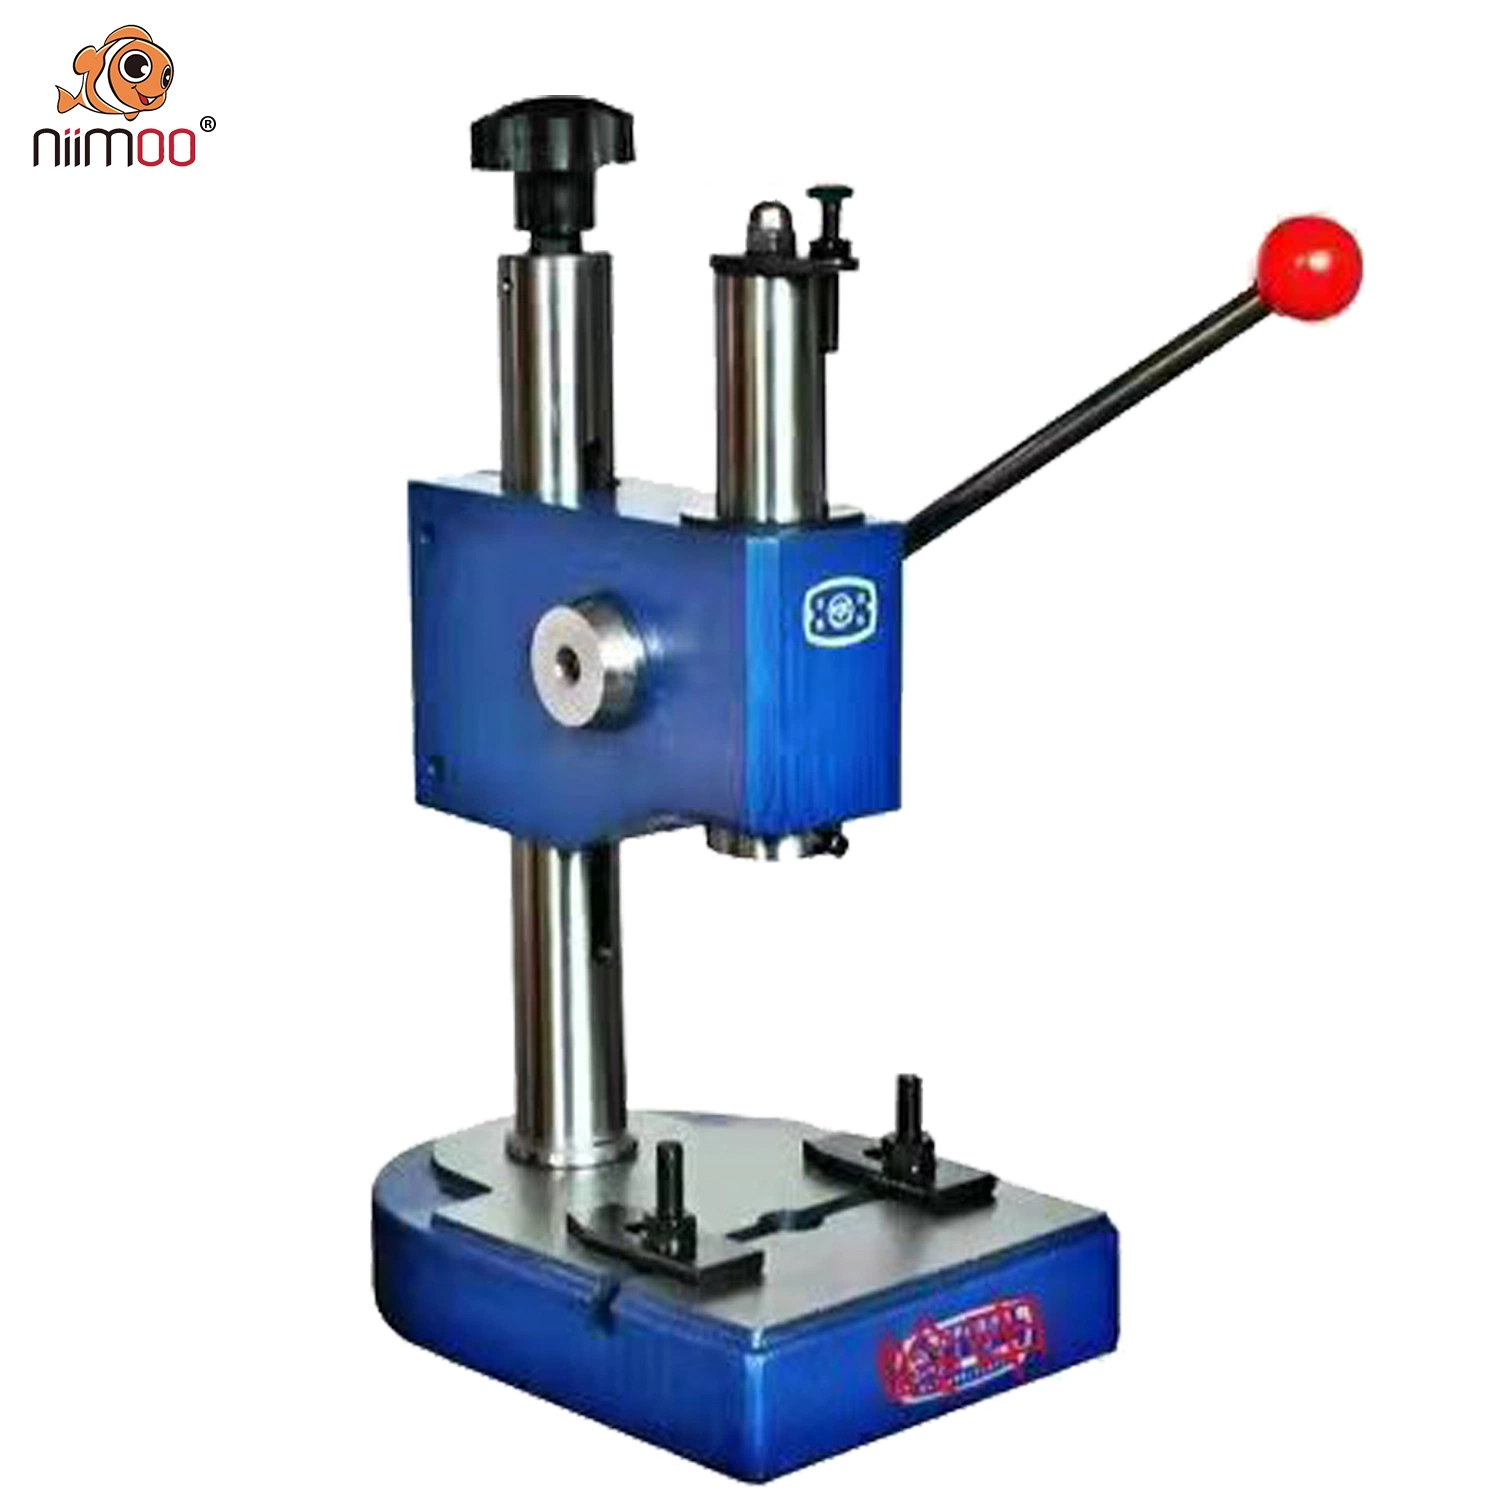 Niimoo Punching Machine Use for Tamp Down The Drip-Tip Electronic Cigarette Vape Pod